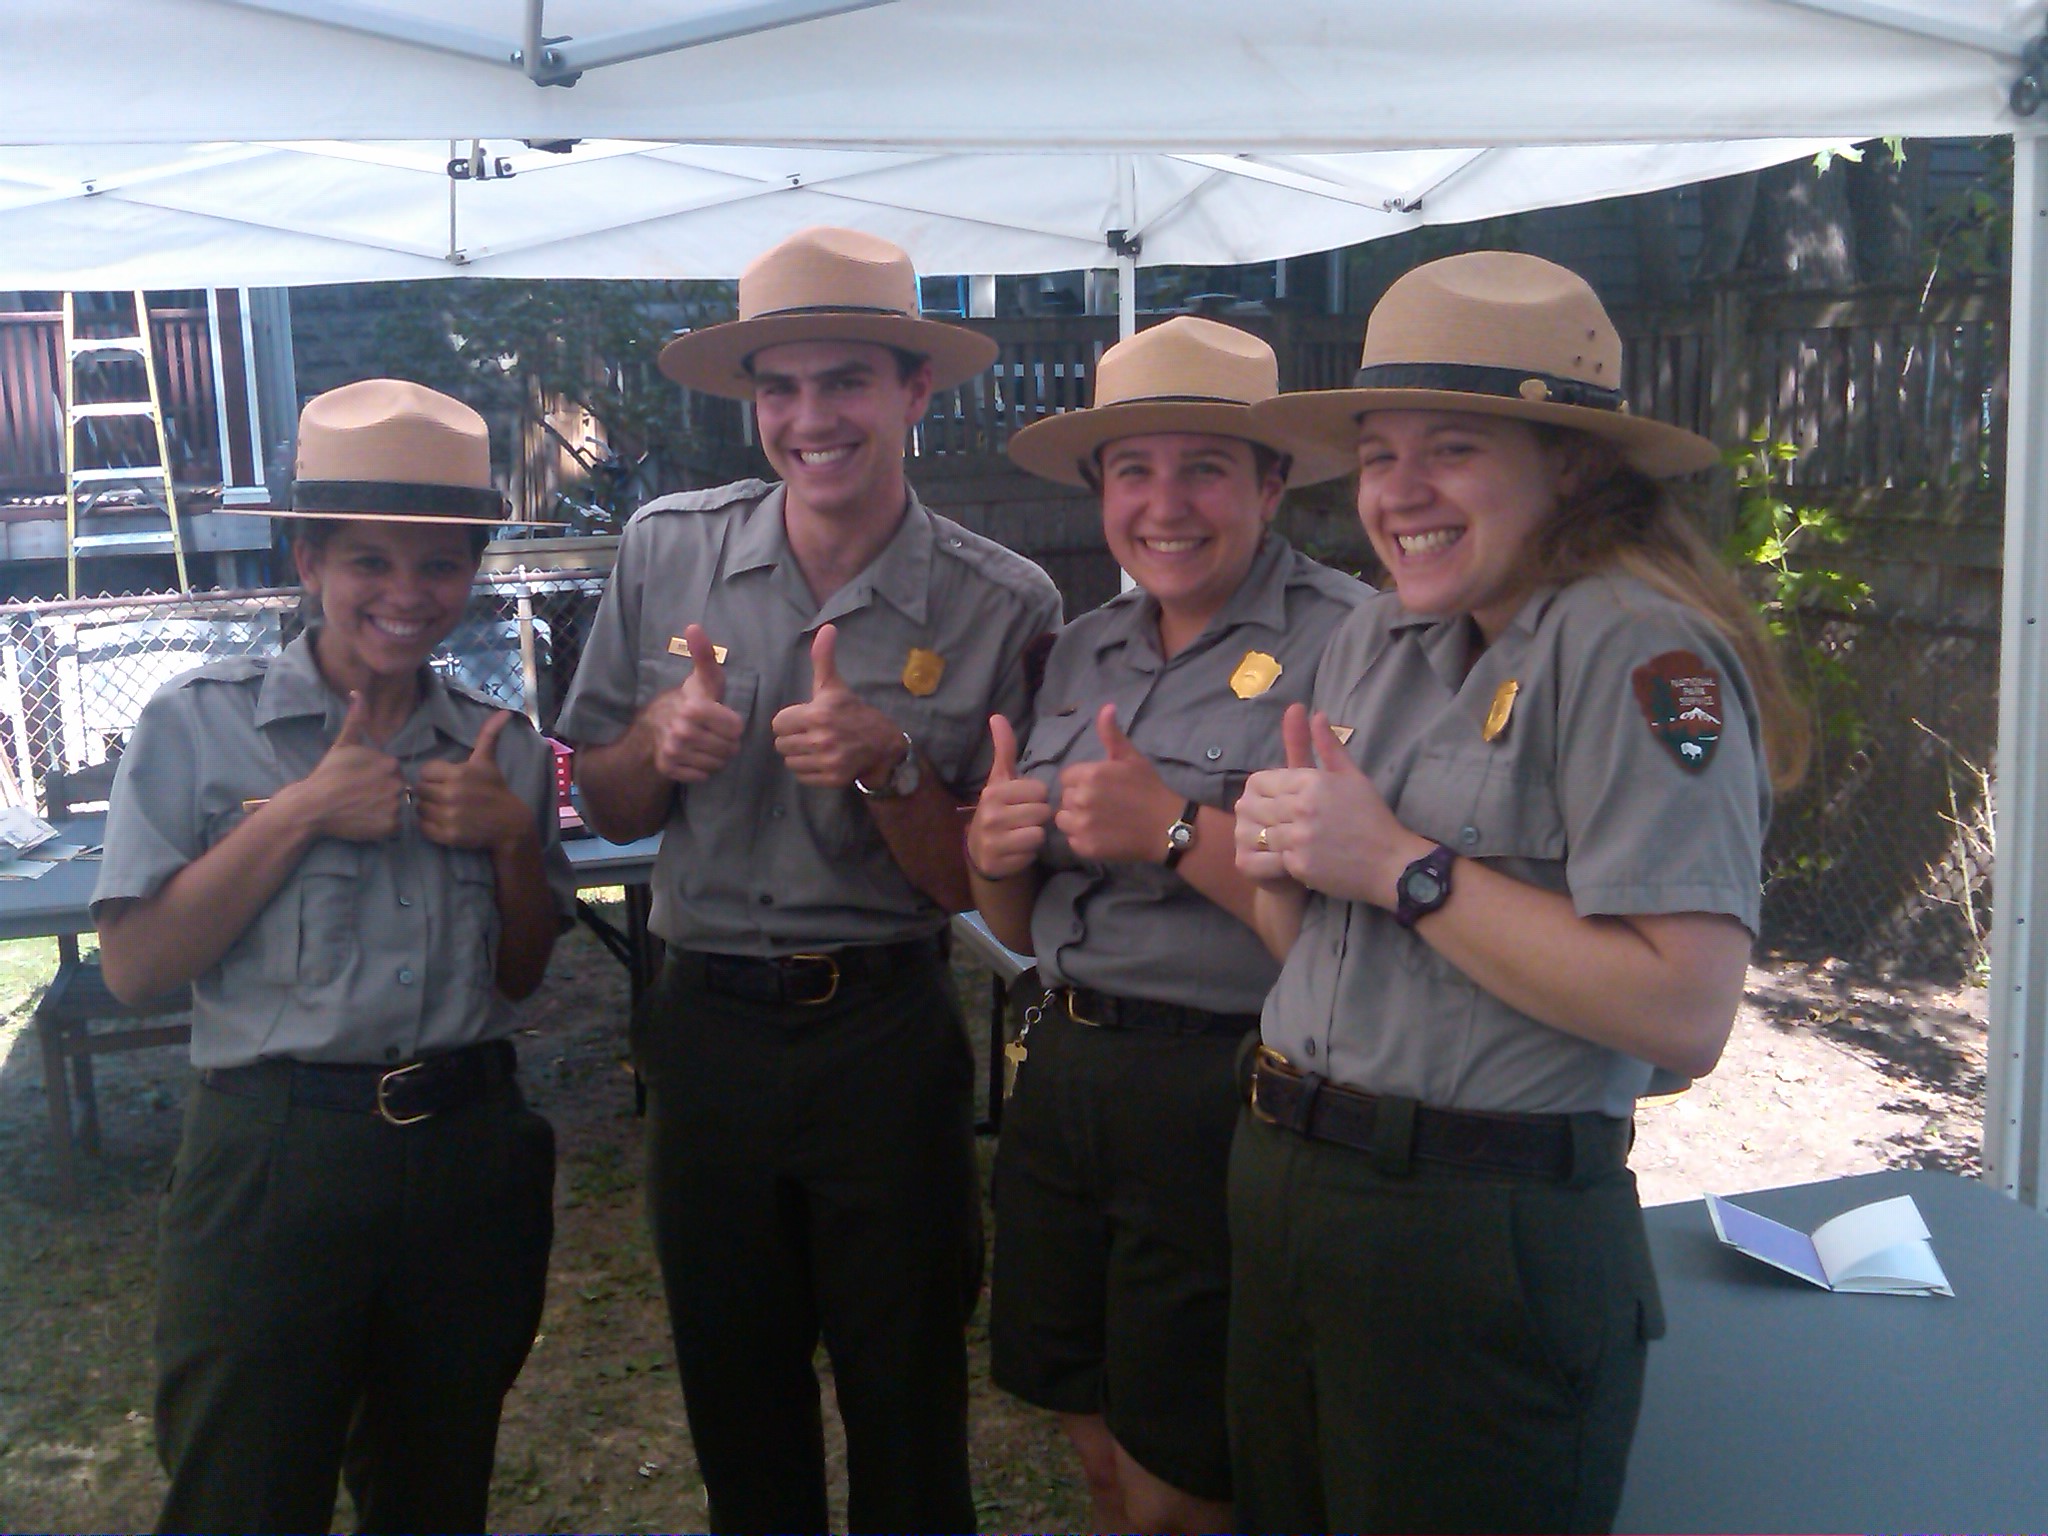 Rangers give Founder's Day Two Thumbs up!